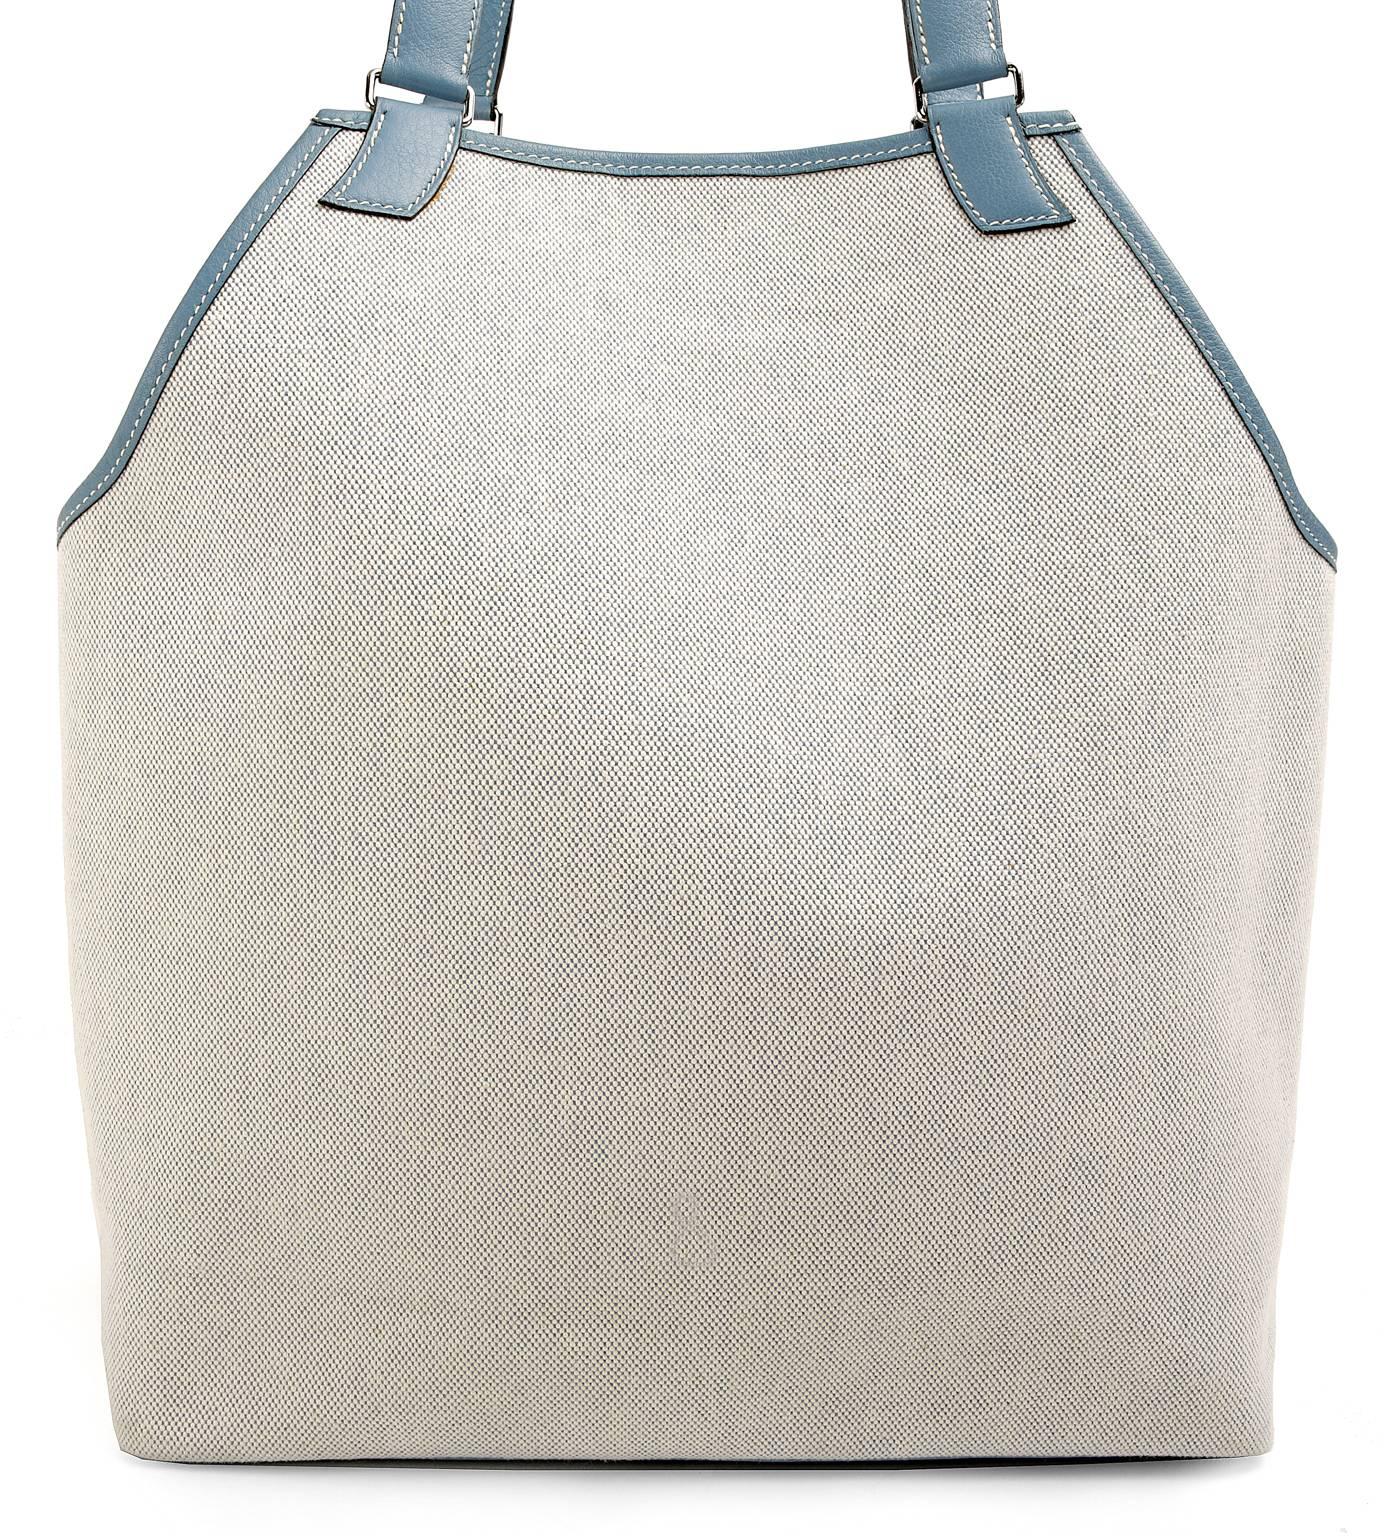 Hermès Blue Jean Leather and Toile Vintage Apron Bag is a rarely seen style in pristine condition.  The simply designed tote is understated yet elegant; perfect for vacation or everyday enjoyment.
 
Natural toile fabric tote is inspired by the